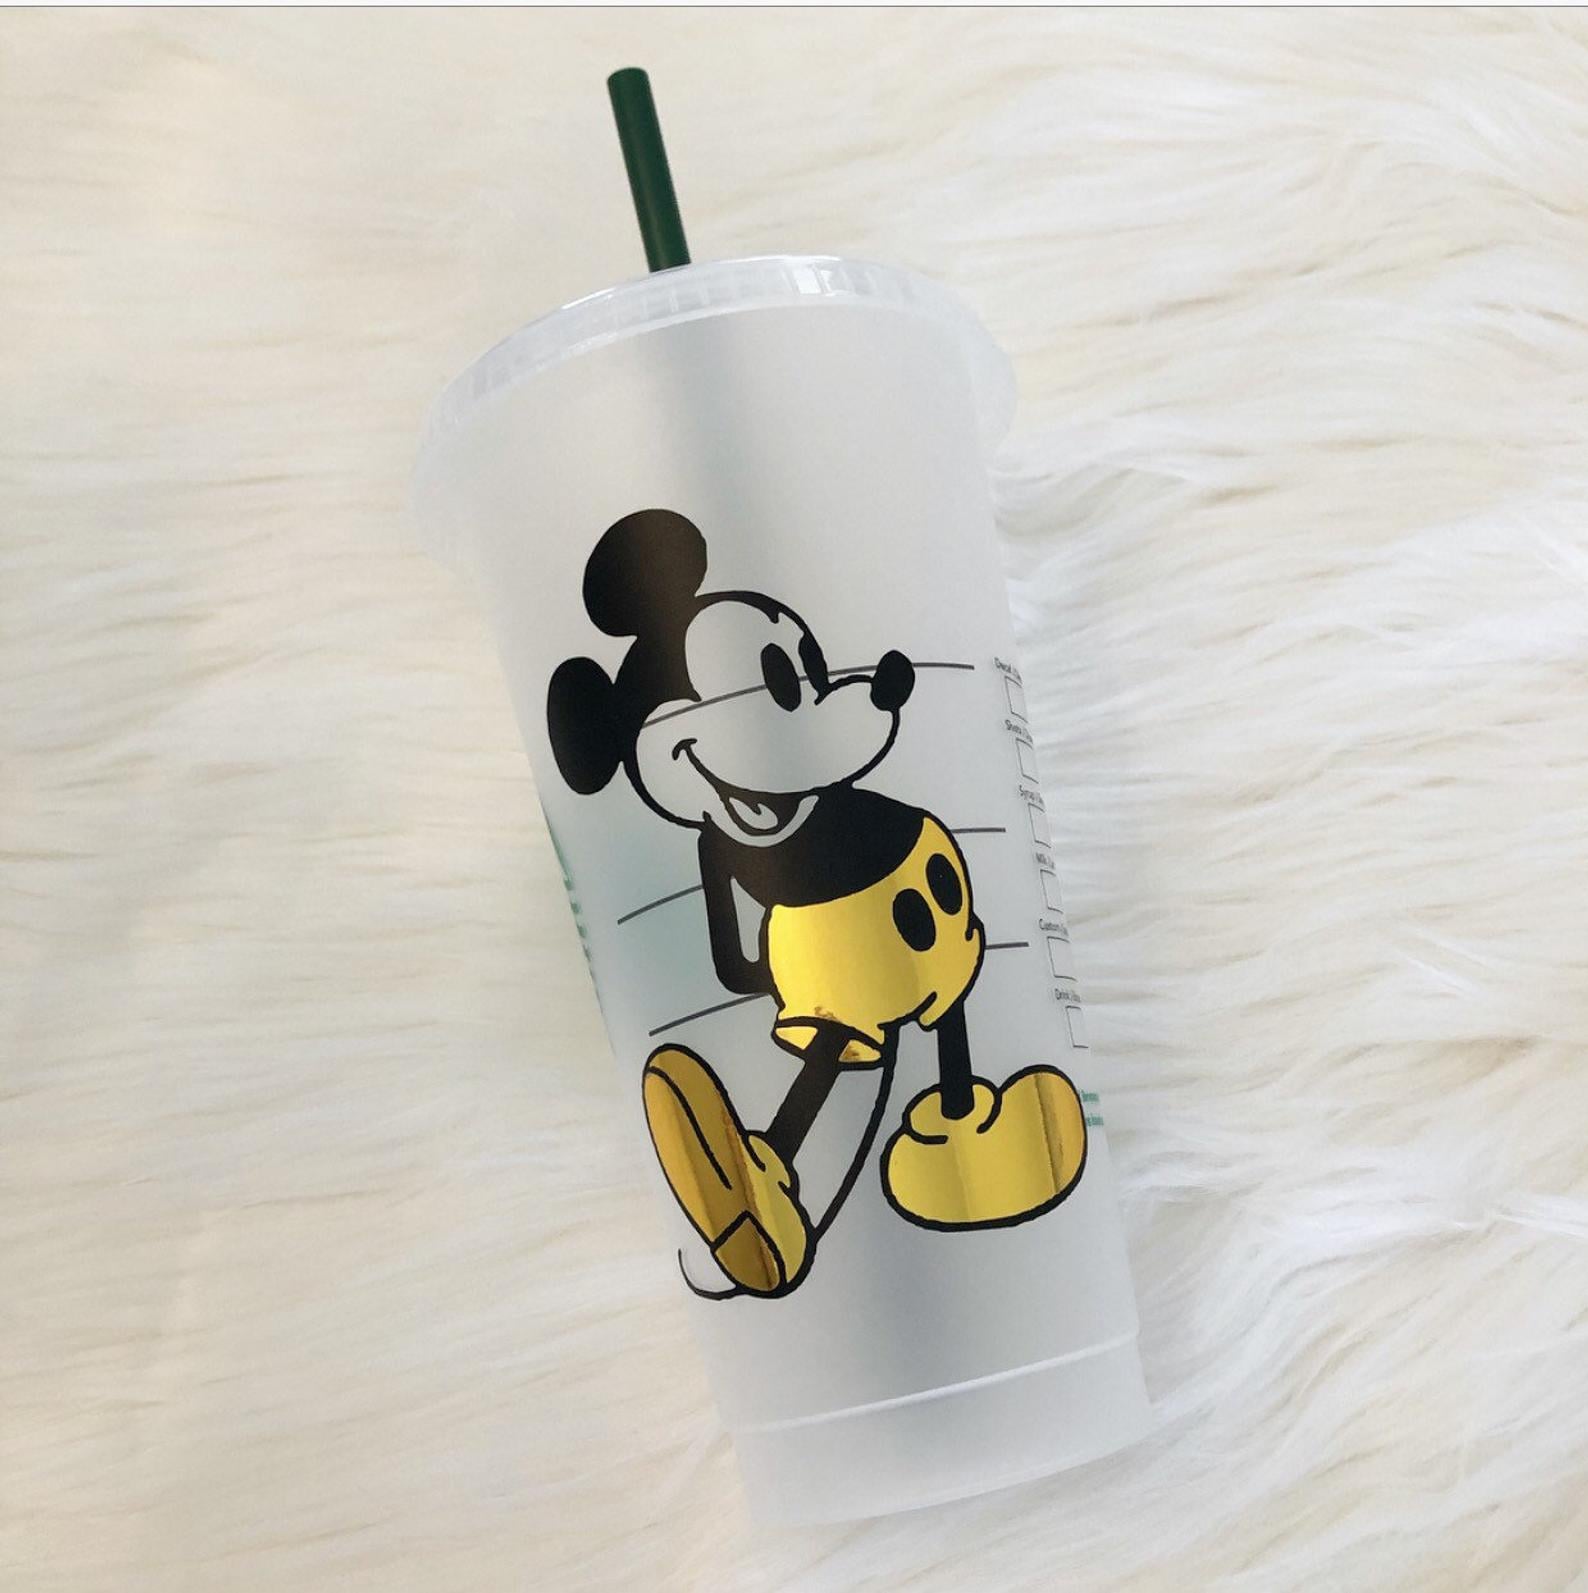 Mickey Mouse Starbucks Cup Disney Cup Mickey Starbucks Cup Gift for Disney Lovers Disney Starbucks Cup